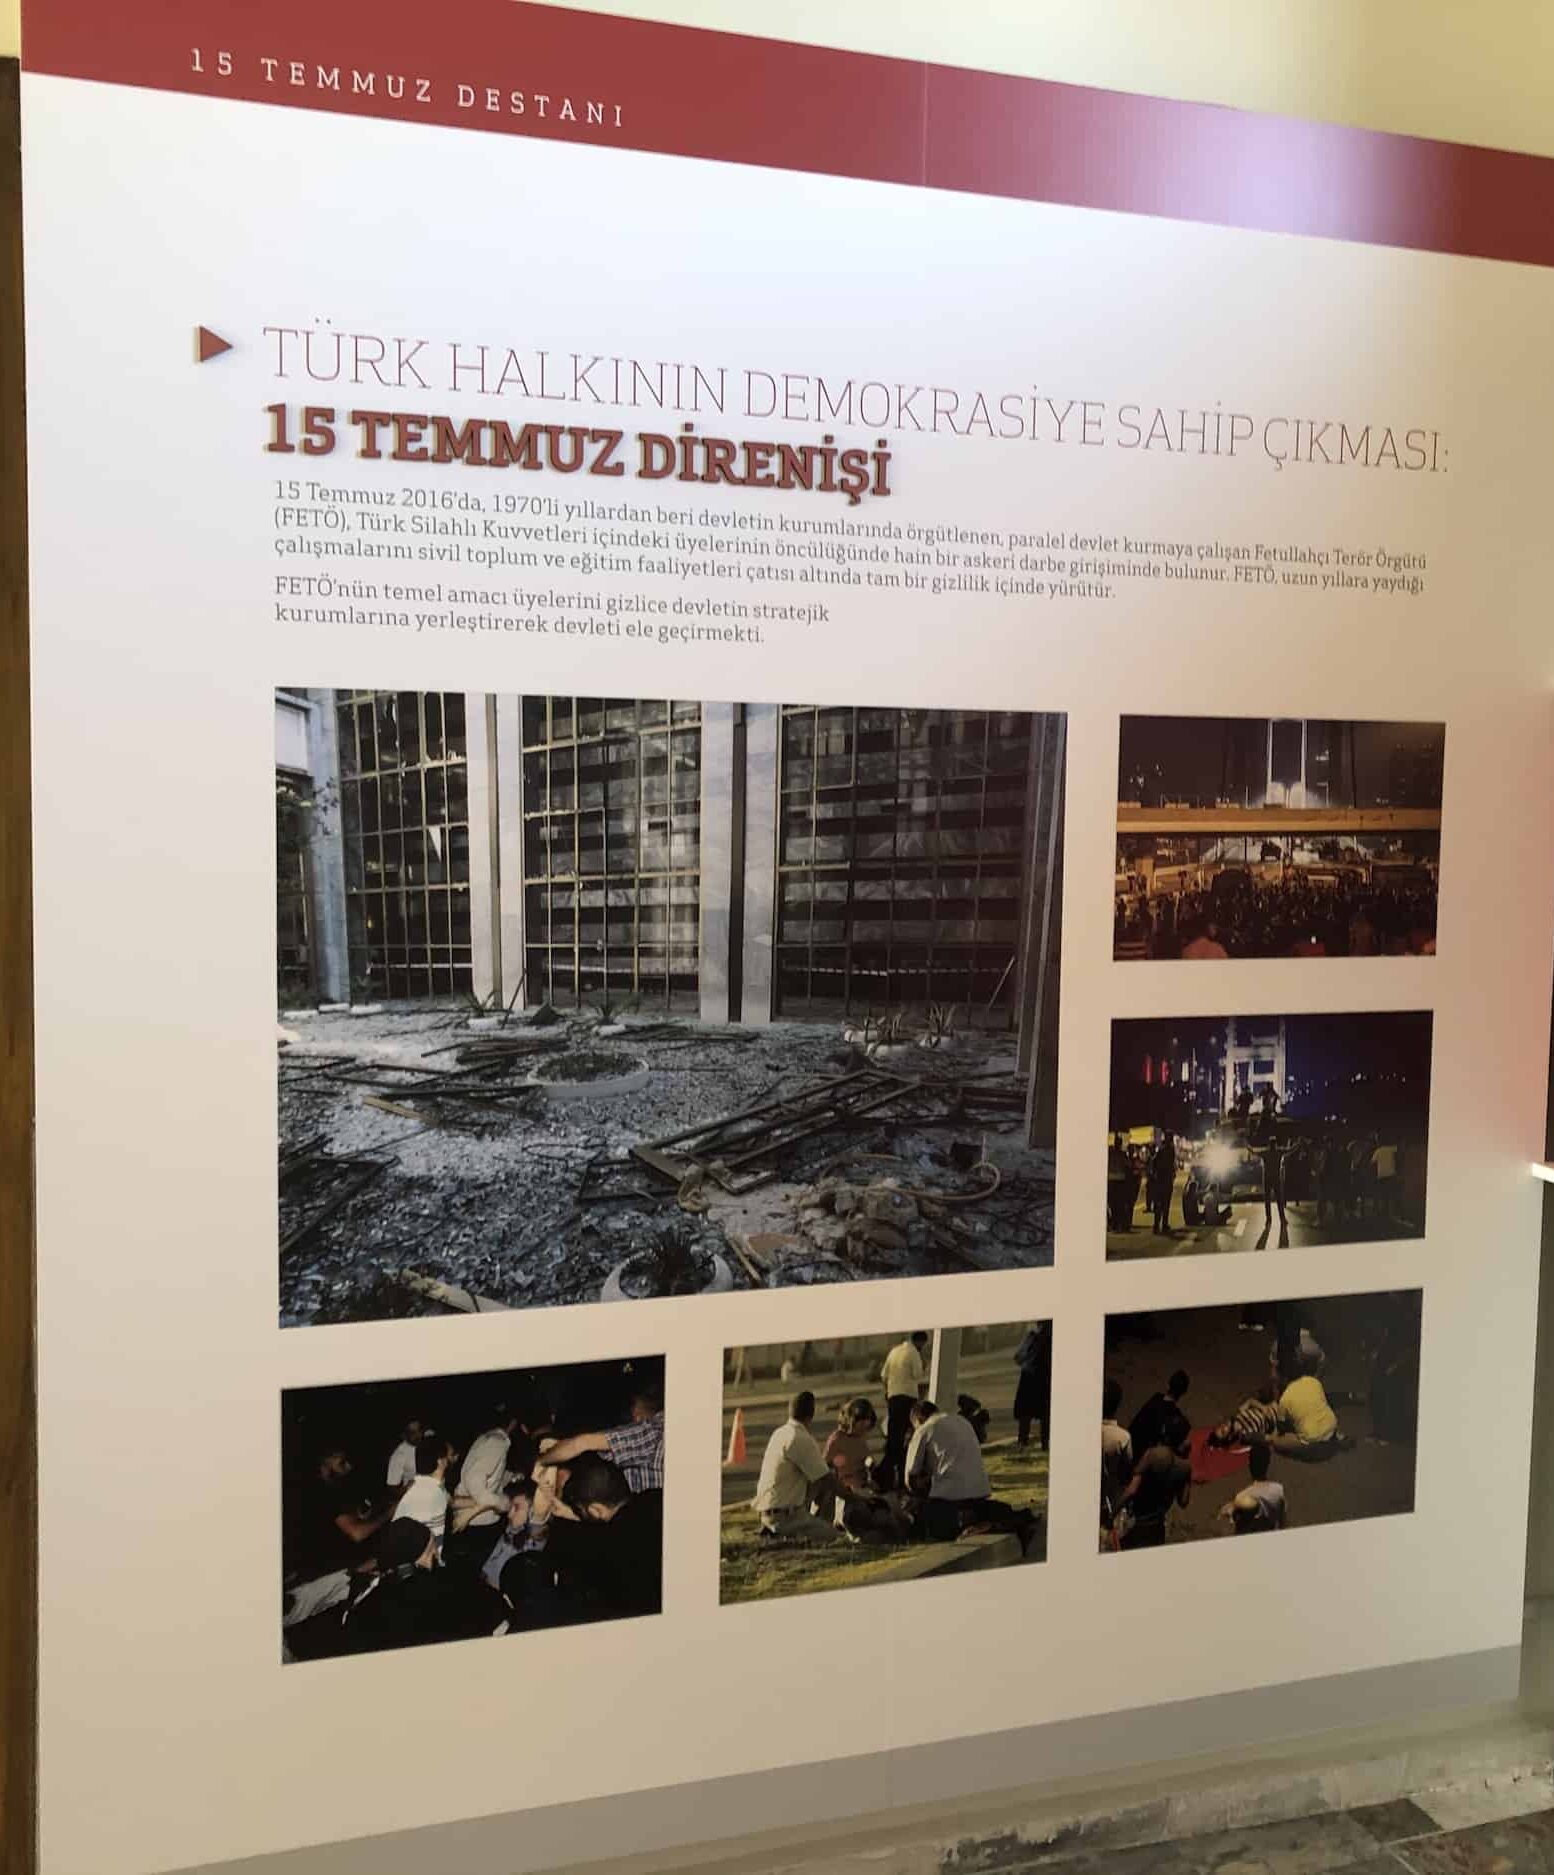 Information about the 2016 coup attempt at the Anadolu University Republic History Museum